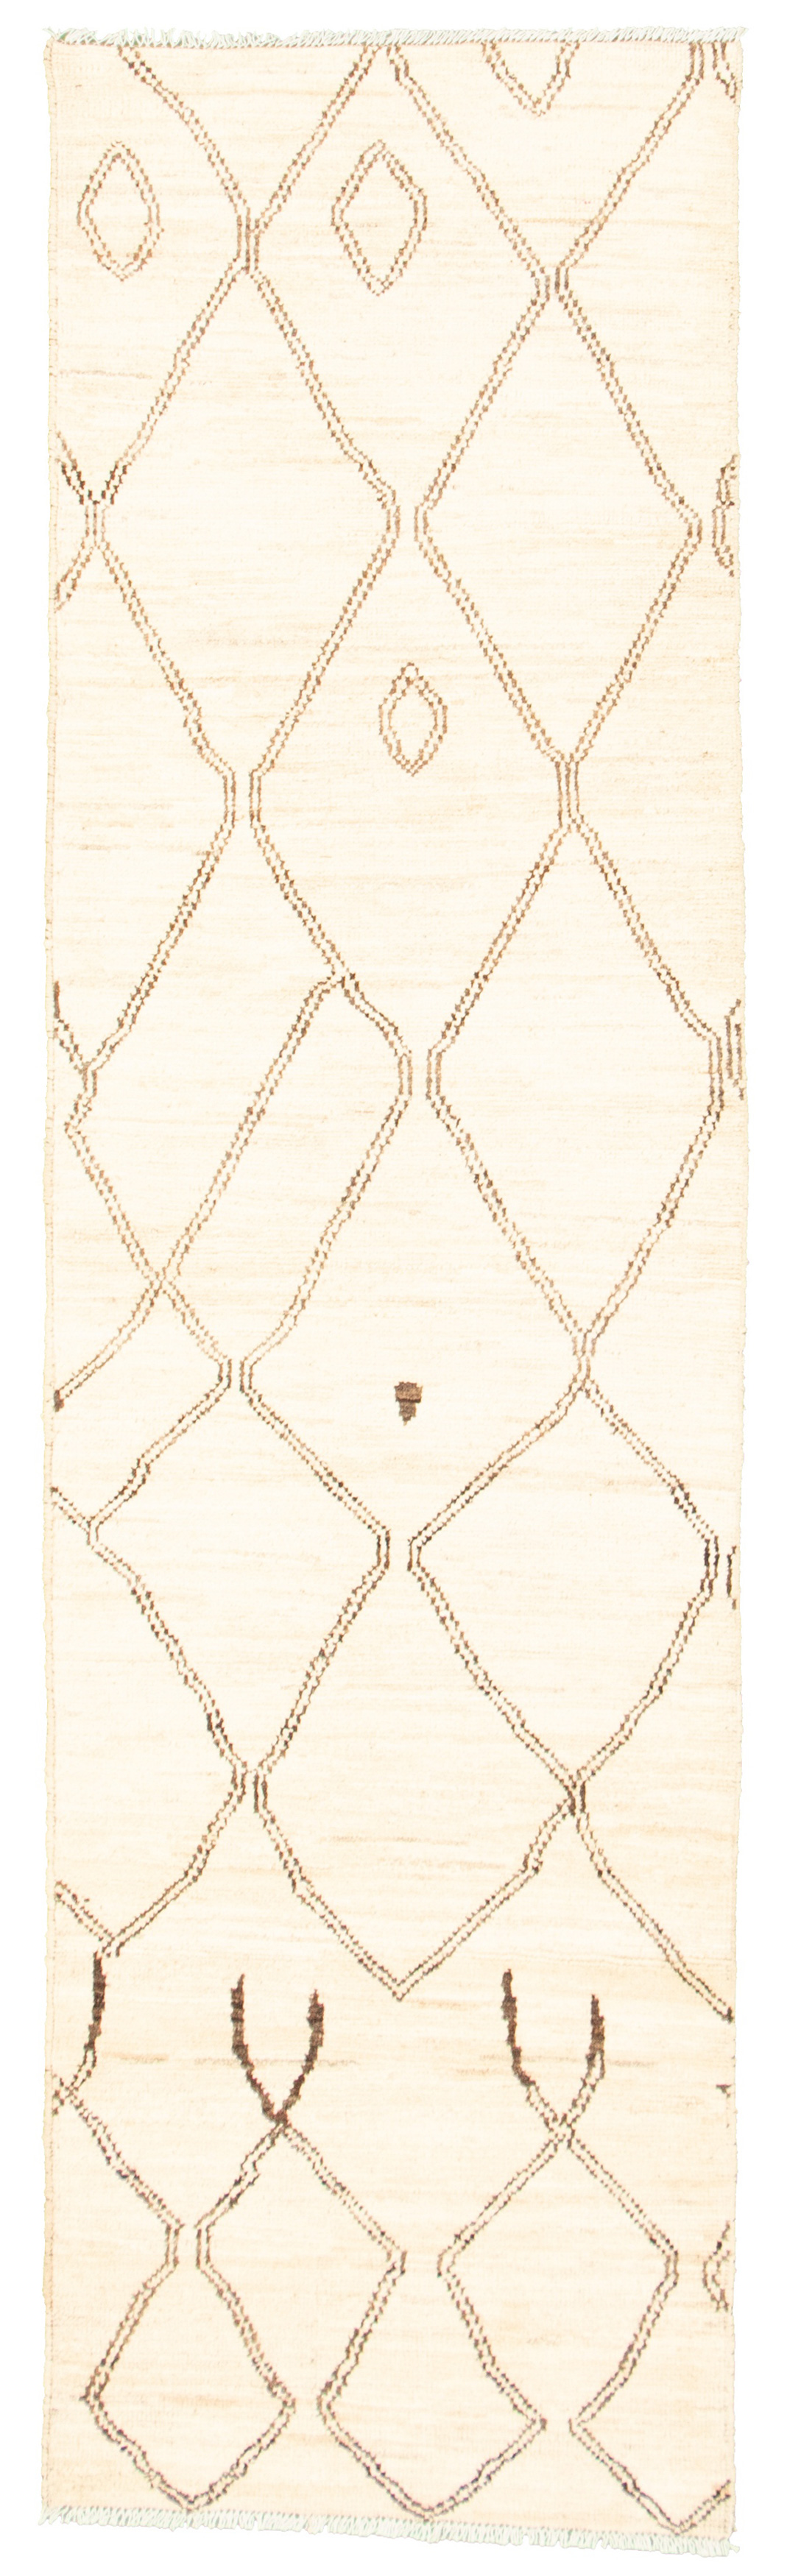 Hand-knotted Marrakech Cream Wool Rug 2'8" x 9'7" Size: 2'8" x 9'7"  